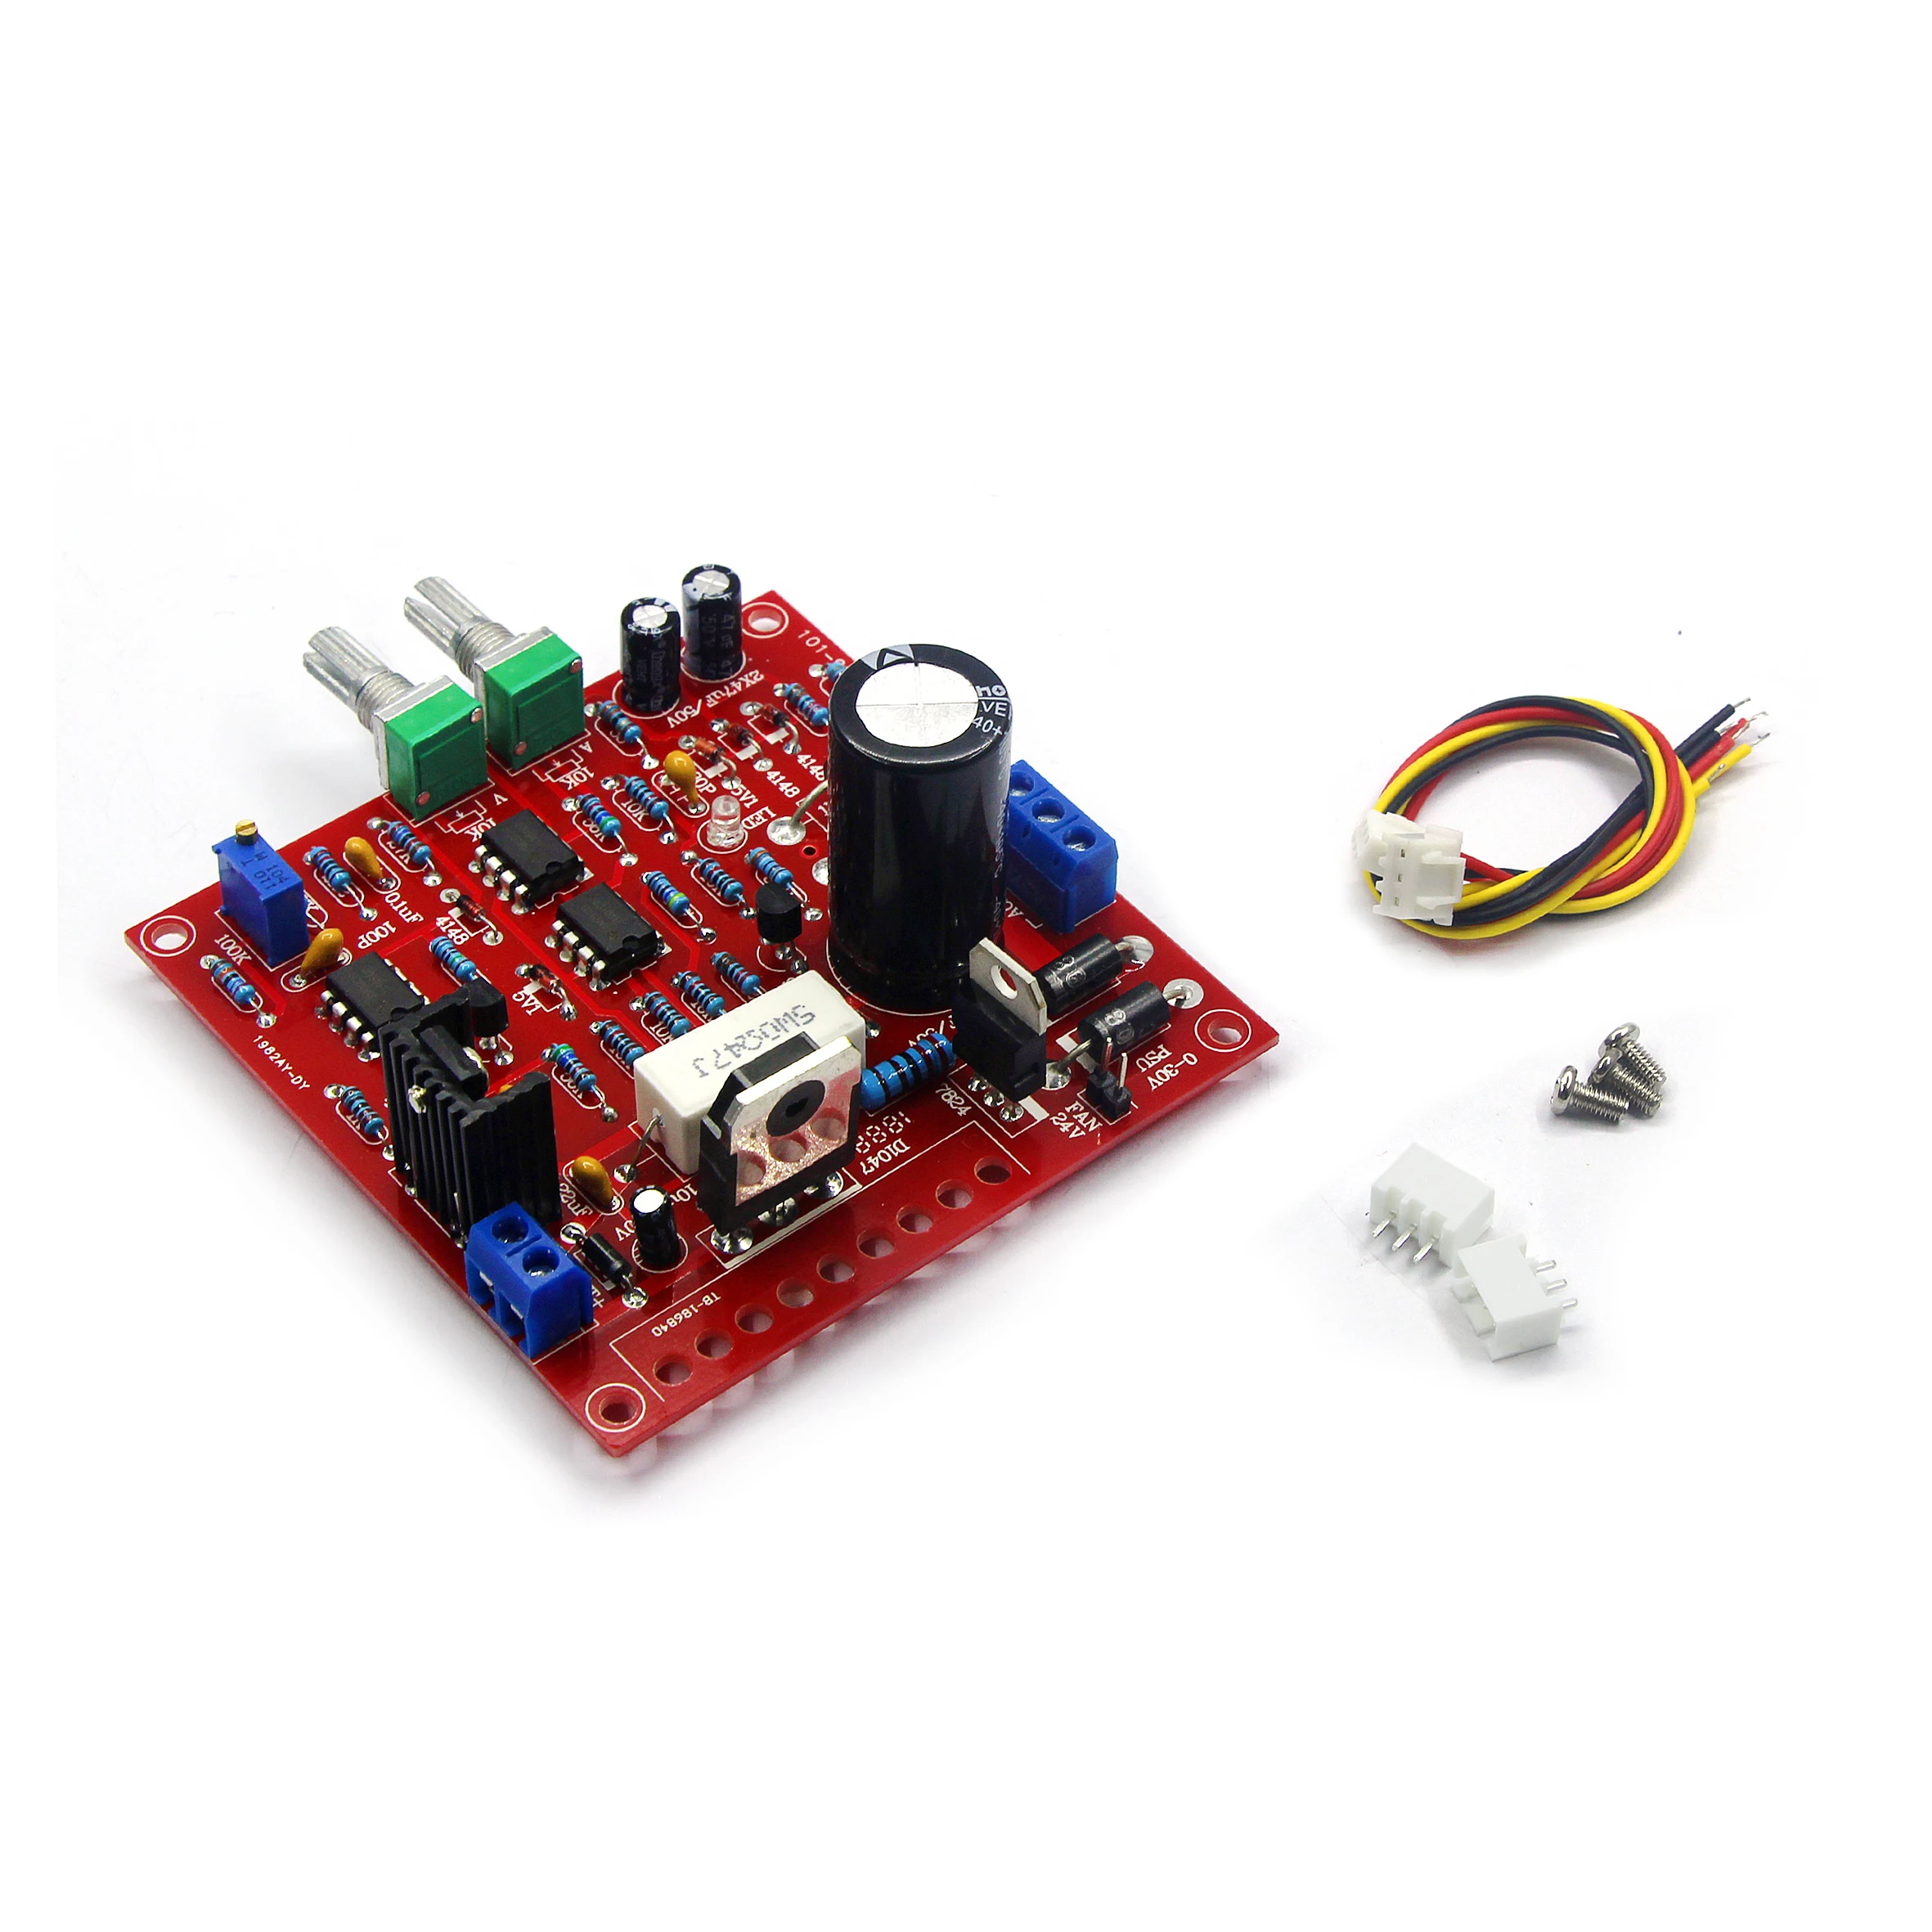 Stabilized Continuous Adjustable DC Regulated Power Supply DIY Kit 0-30V 2mA/_JO